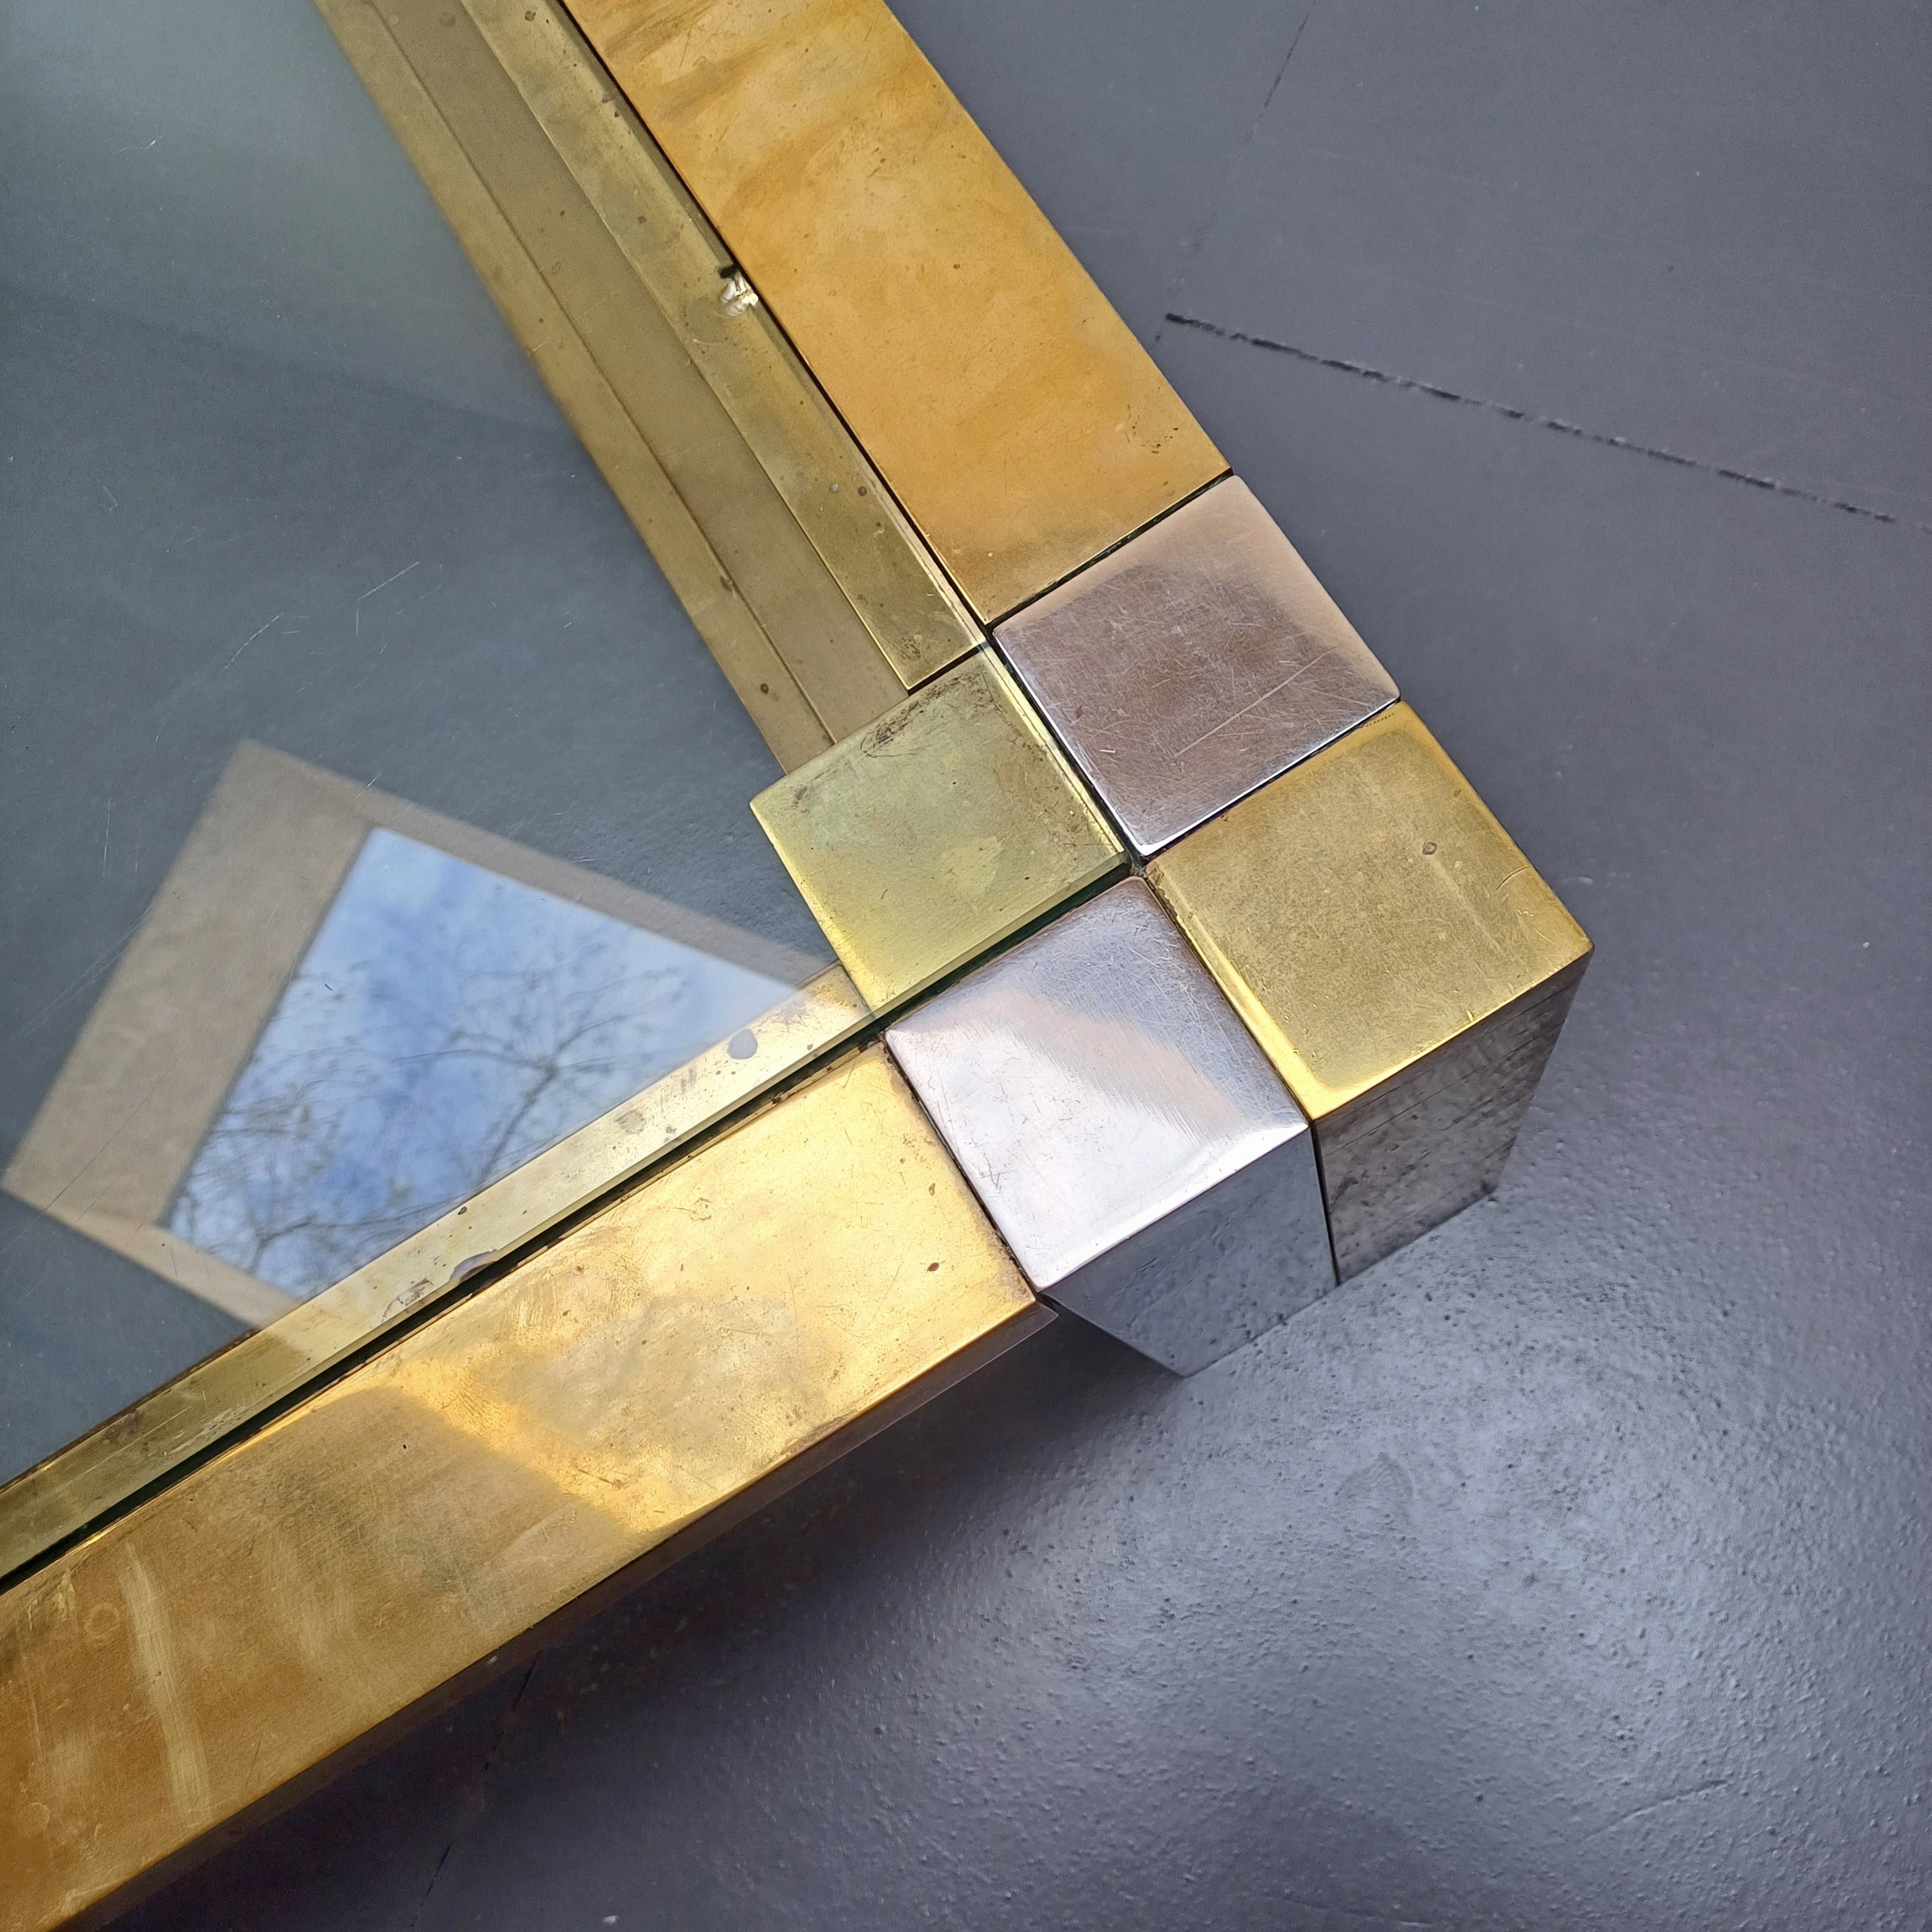 Maison Jansen 70's Glass, Brass And Chrome Coffee Table